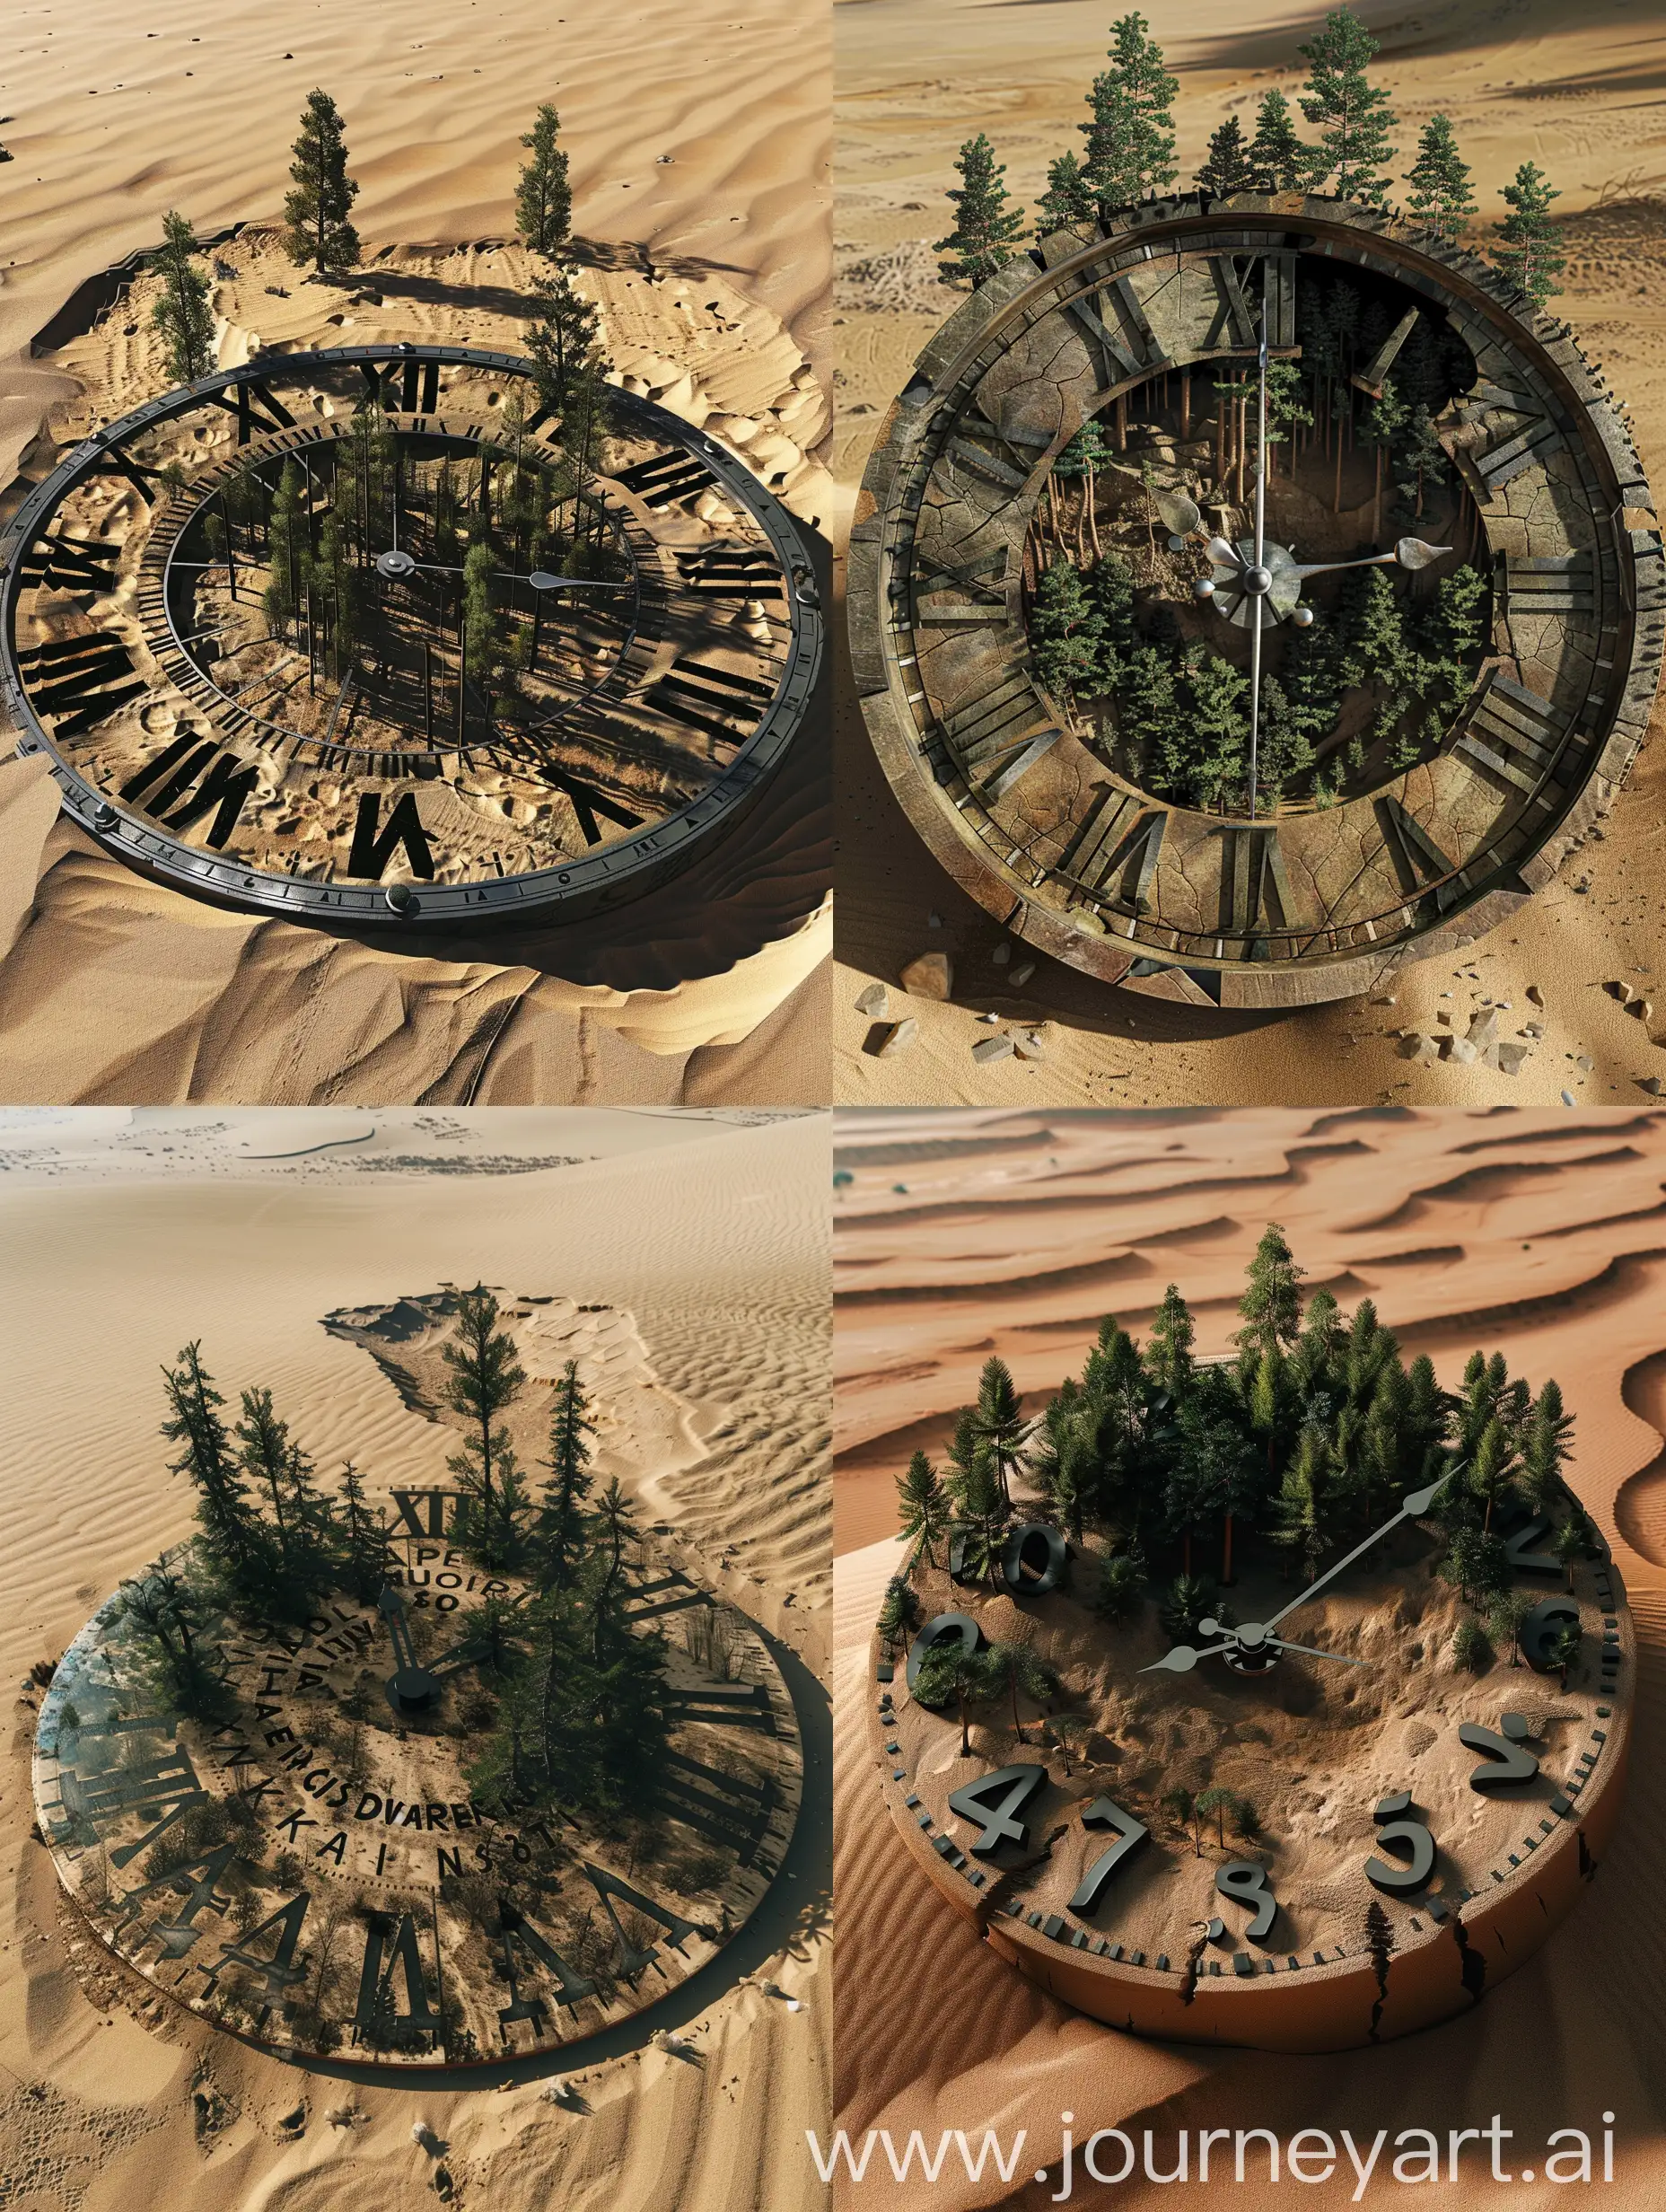 A clock with letters instead of numbers. The letters are black, the clock contains forest elements. The clock is huge and lies in the desert.